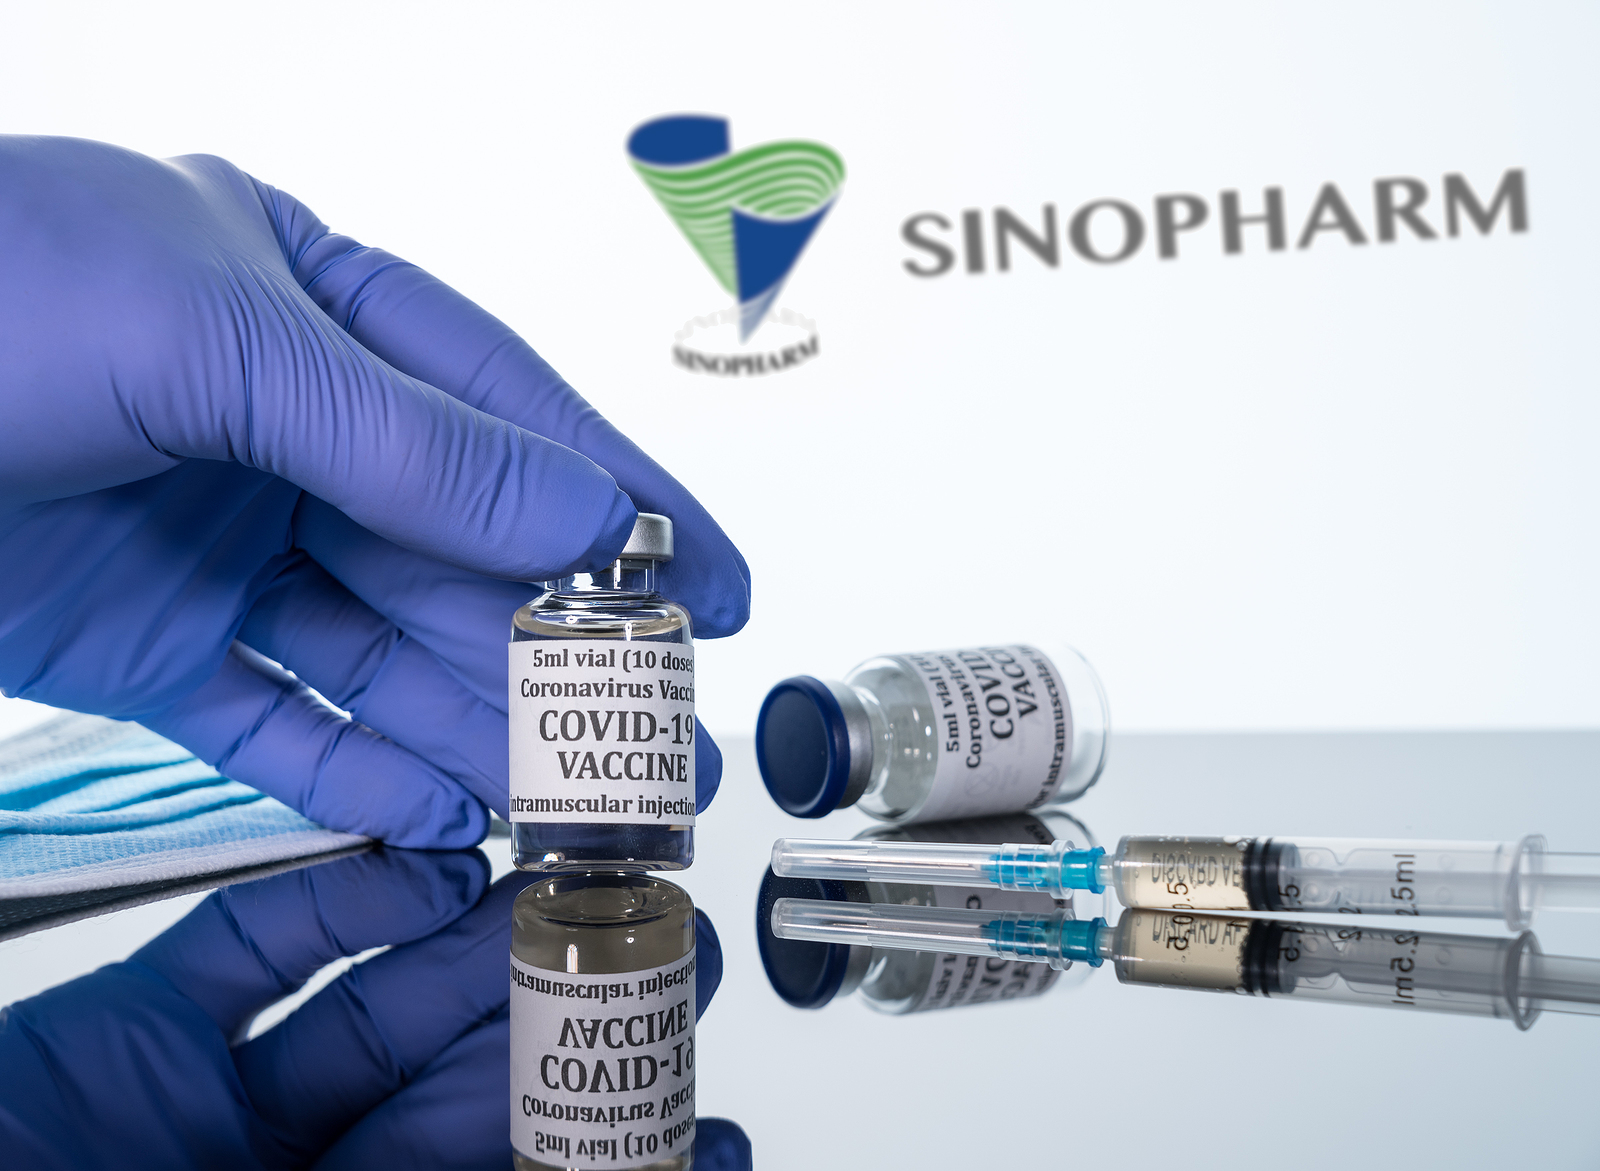 Sinopharm vaccine finally gets WHO approval – good news for TT says Browne